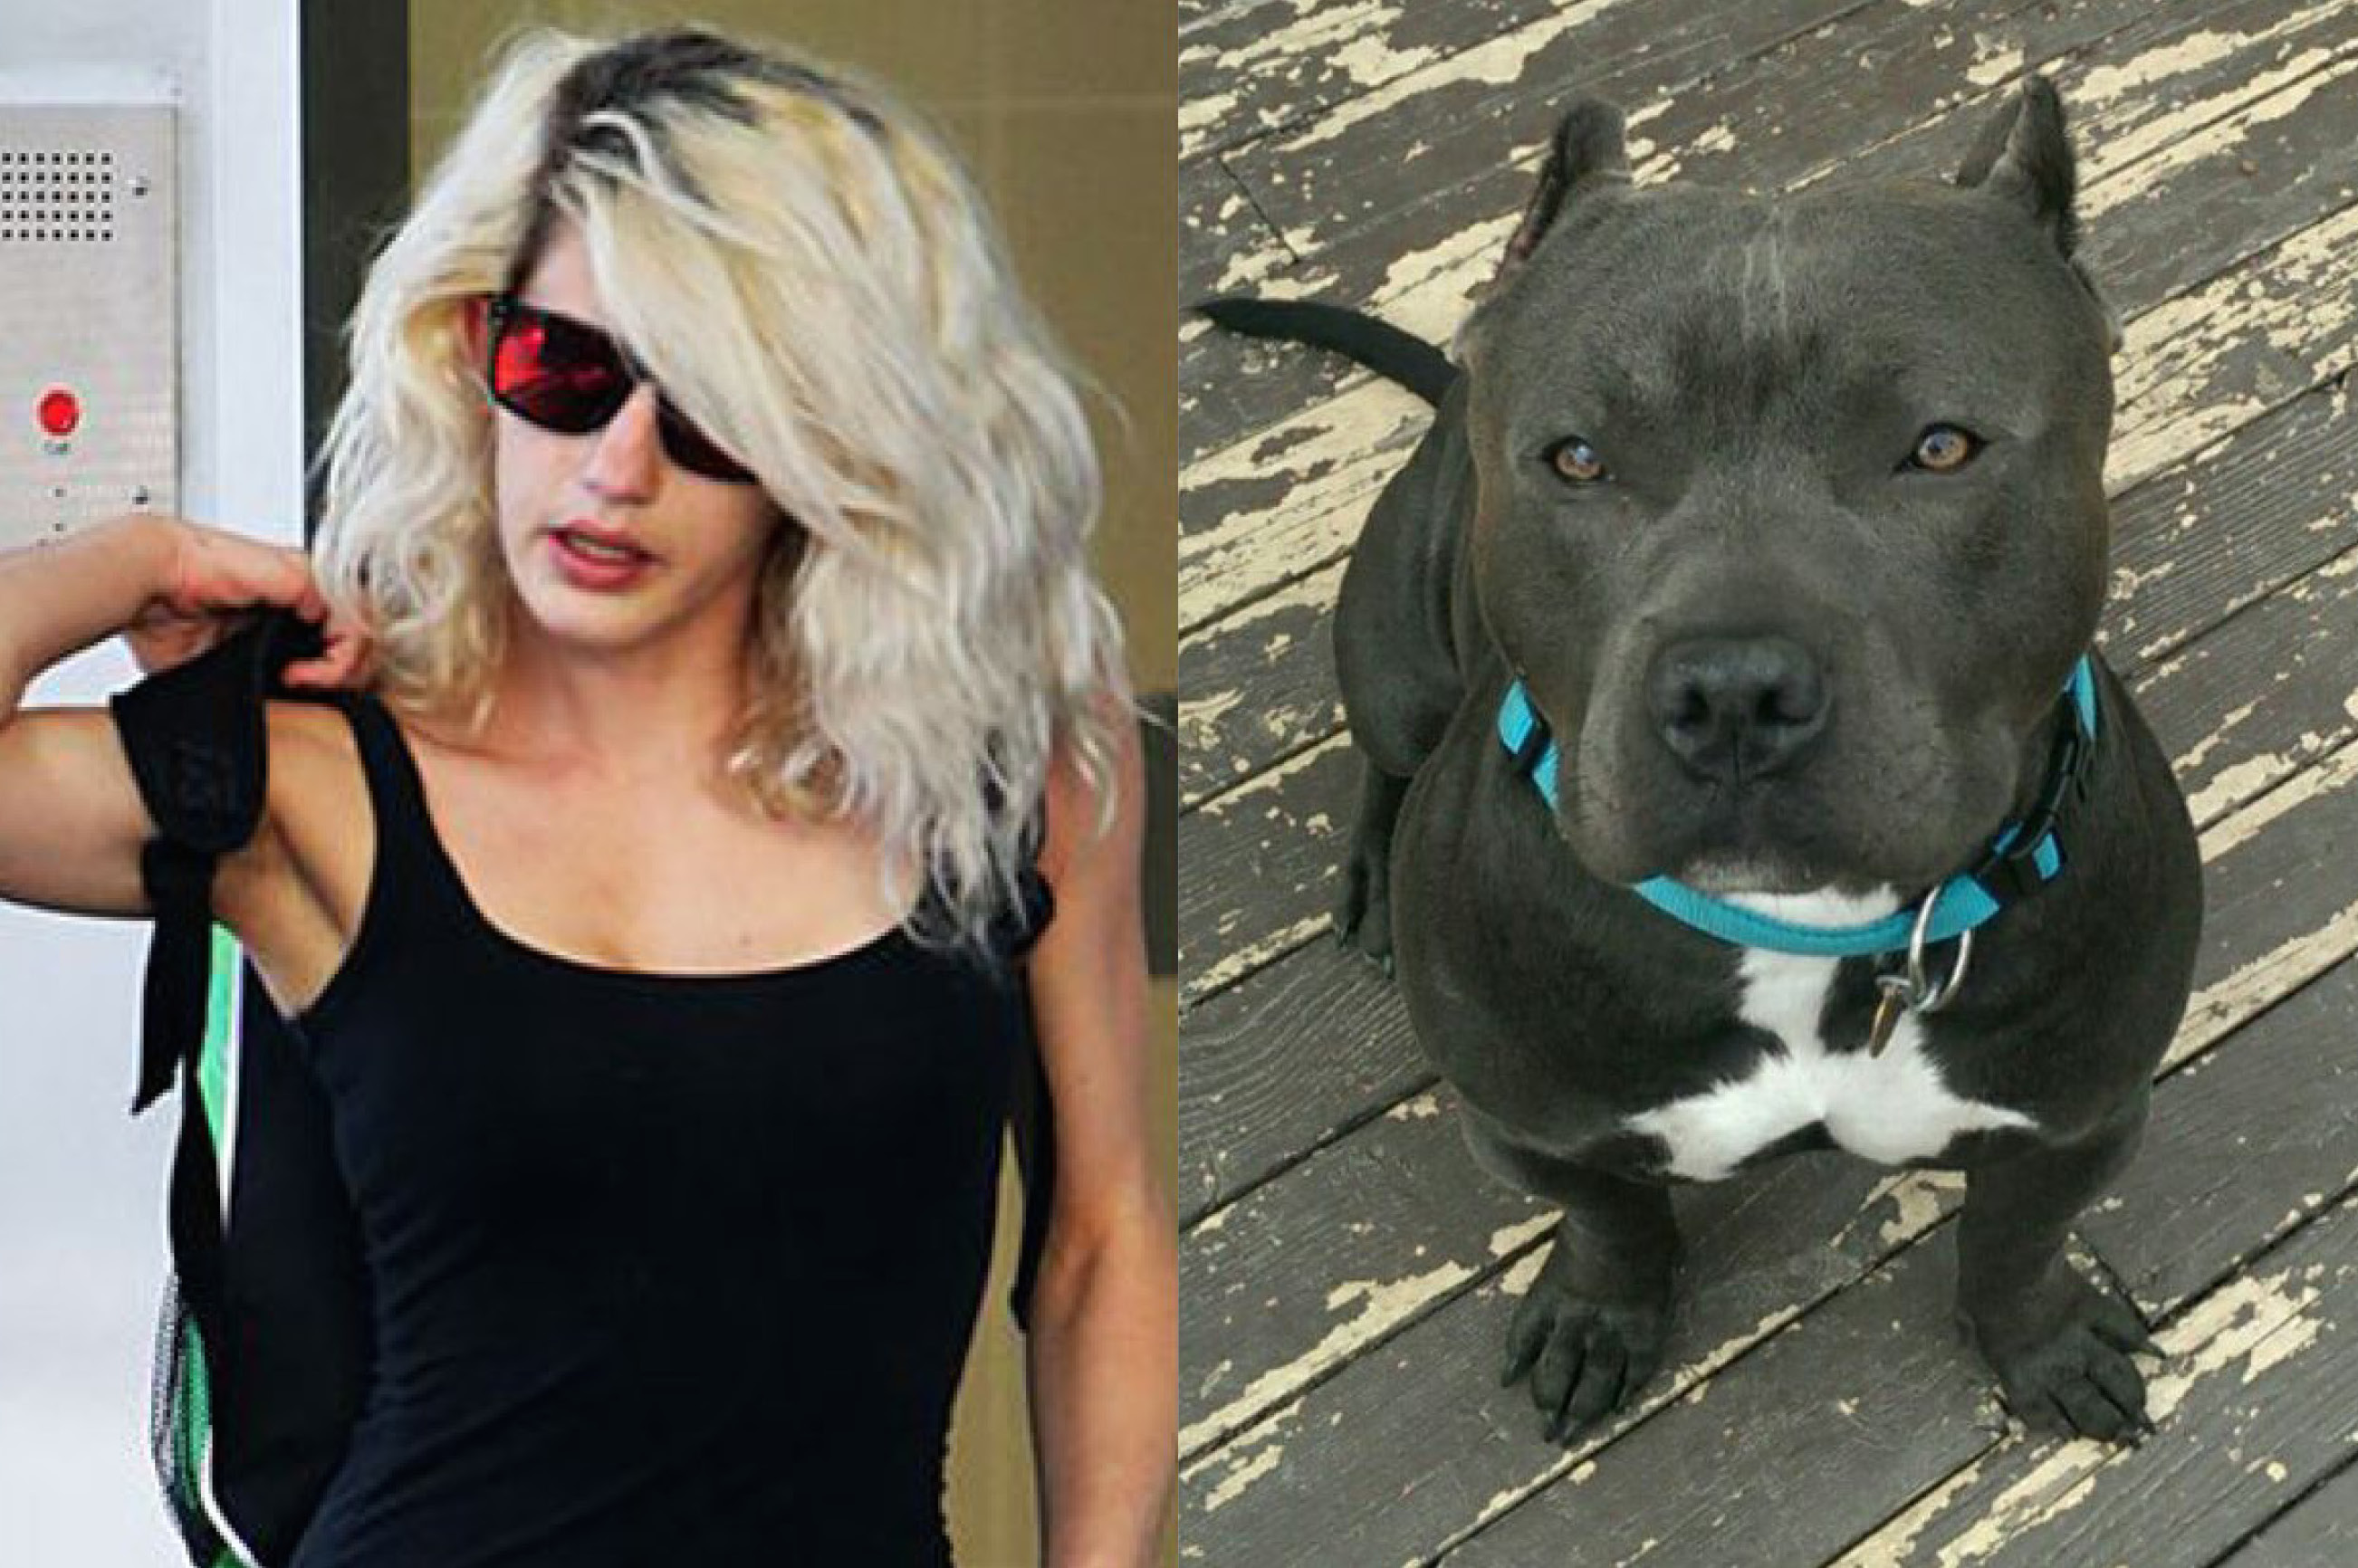 This Hot Blonde Chick Admitted To Shagging Her Pitbull After Police